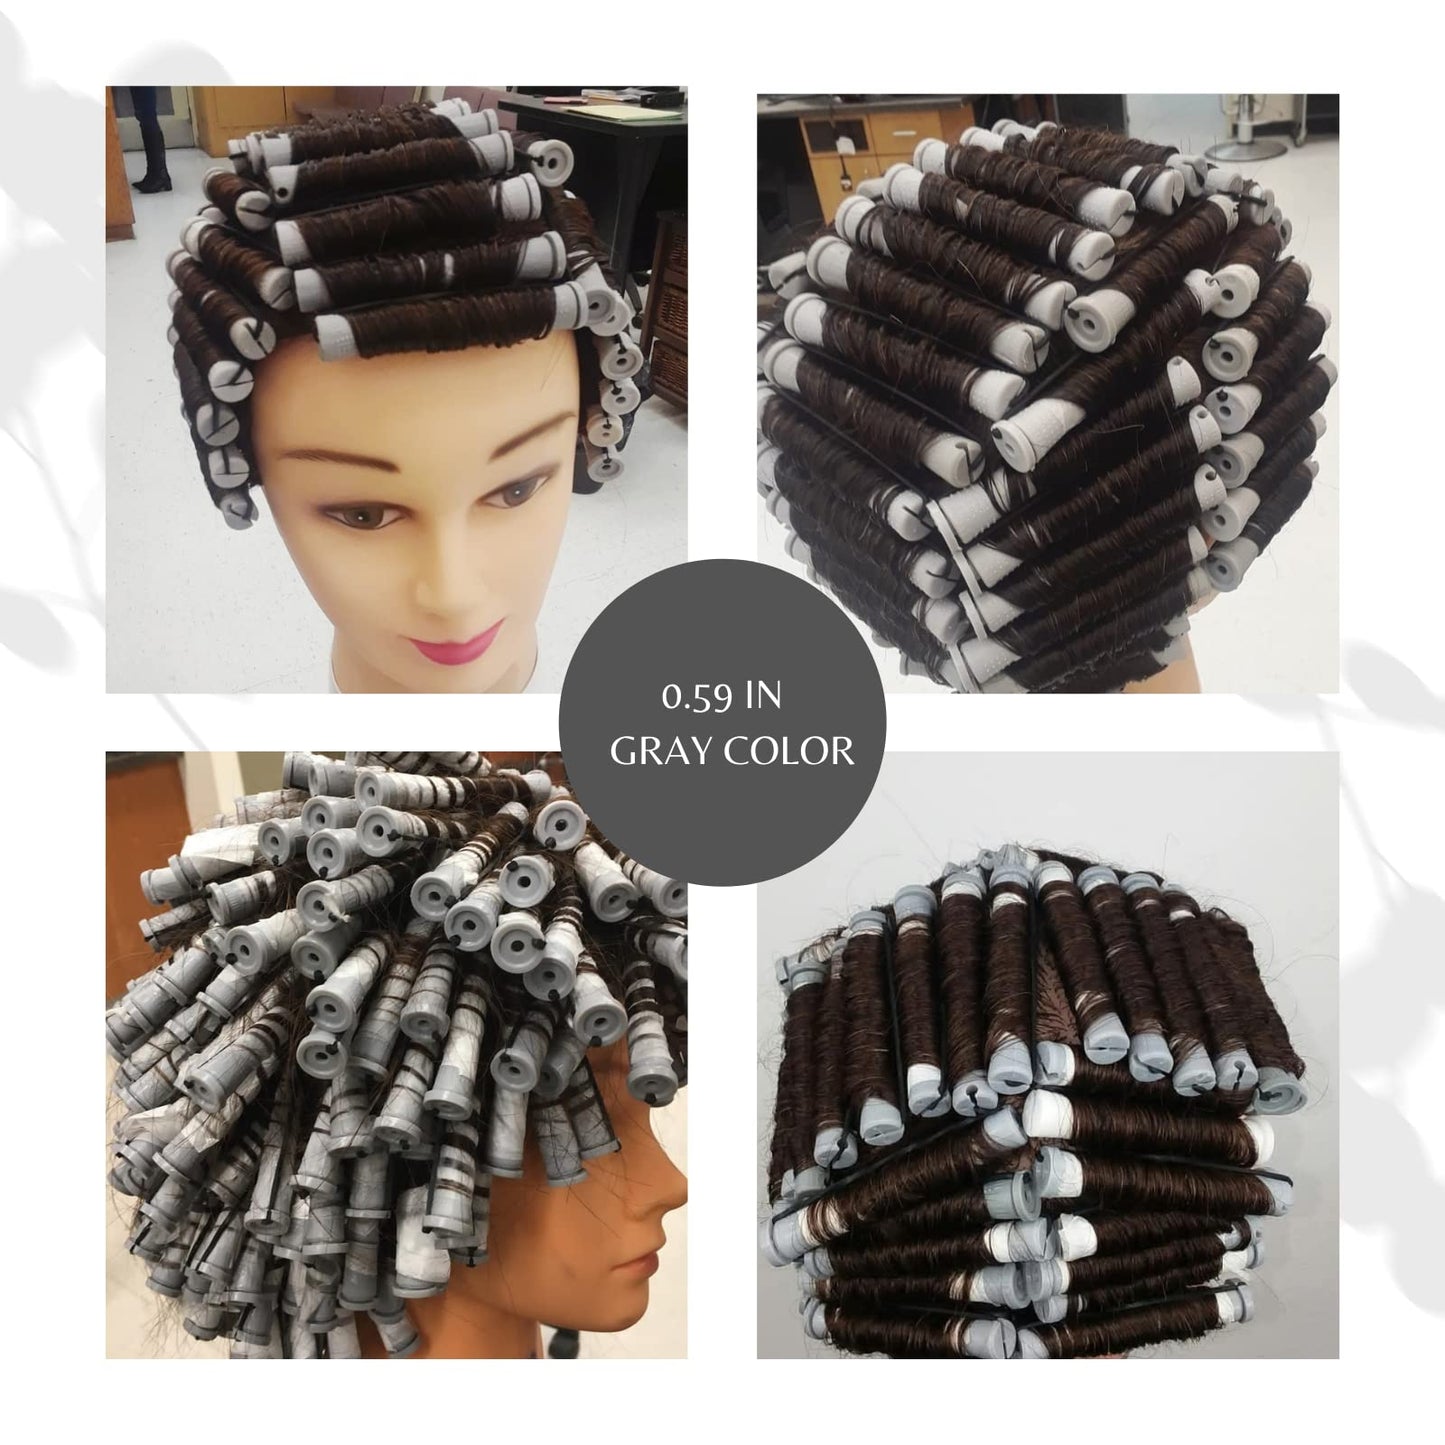 Perm Rods,60 pcs Hair Rollers for Natural Hair Long Short Hair Styling Tool Hair Curlers Small Size 0.59 inch Gray Color